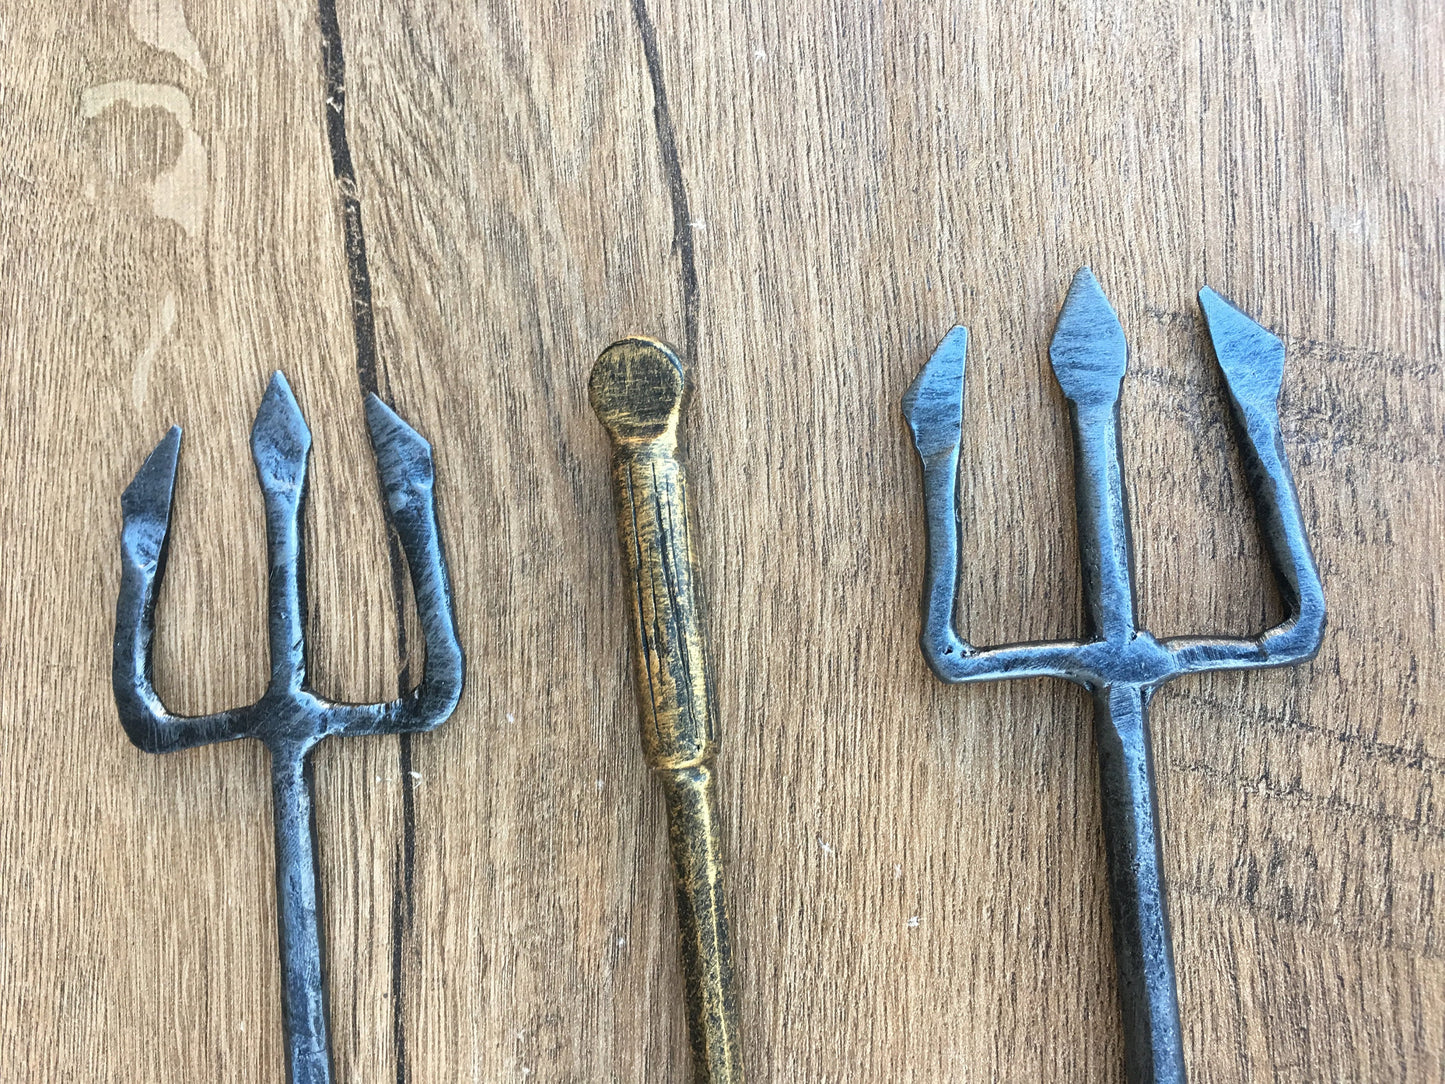 Hand forged trident, cosplay weapon, trident, Poseidon, Neptune, mermaid, Triton, King Triton, trident props, trident toys, trident scepter